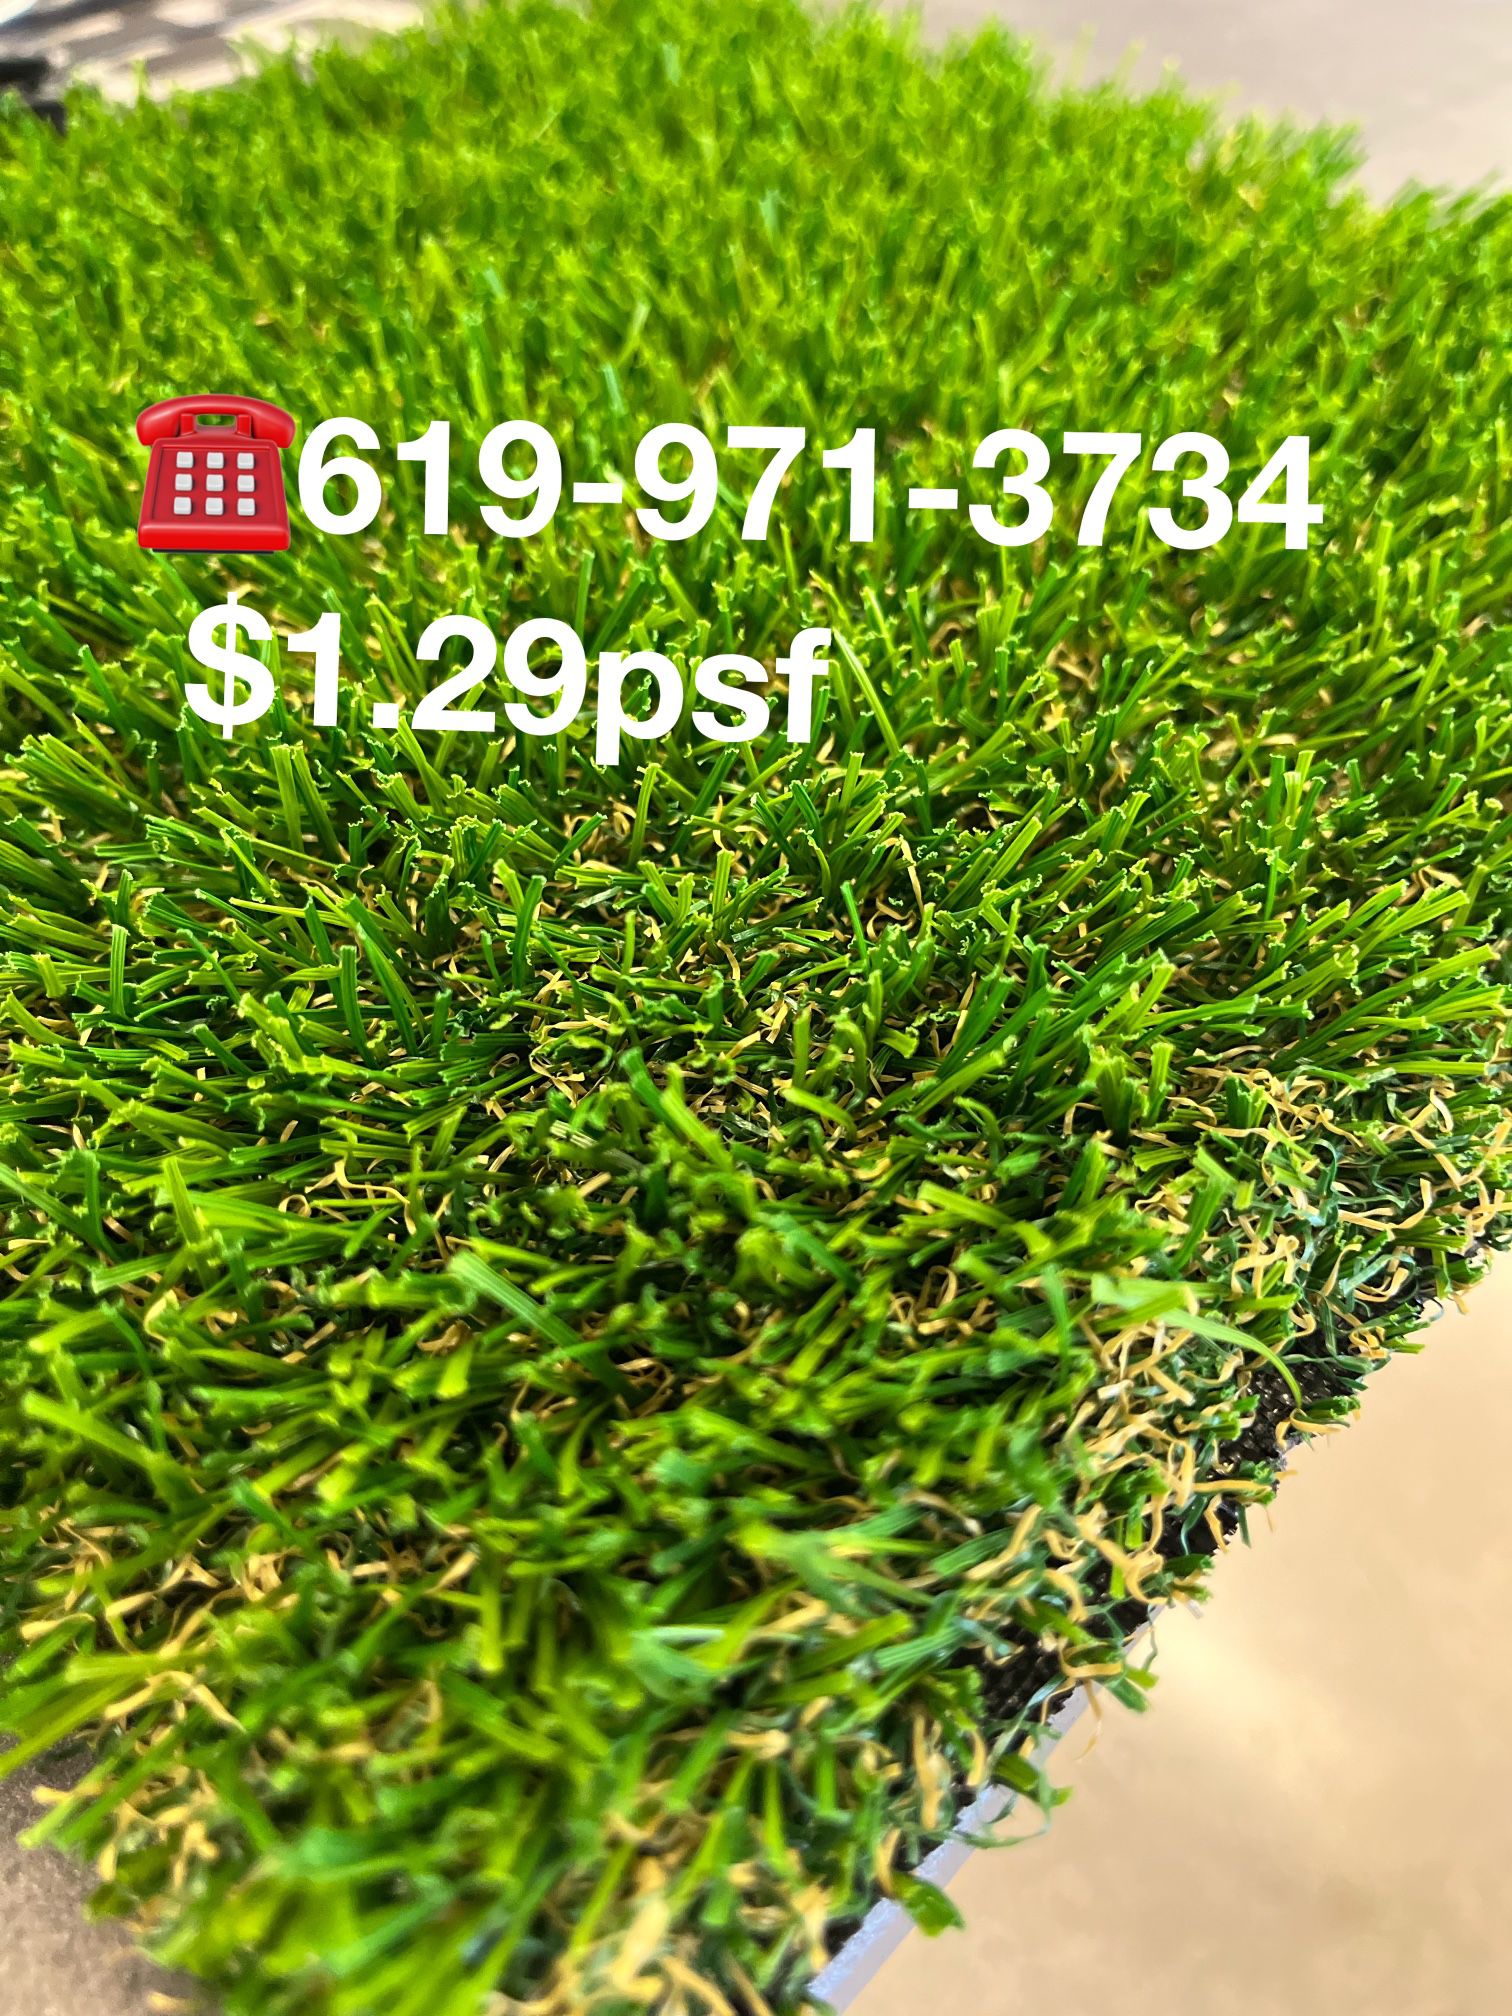 BRAND NEW ARTIFICIAL $1.29 Turf On sale 👀